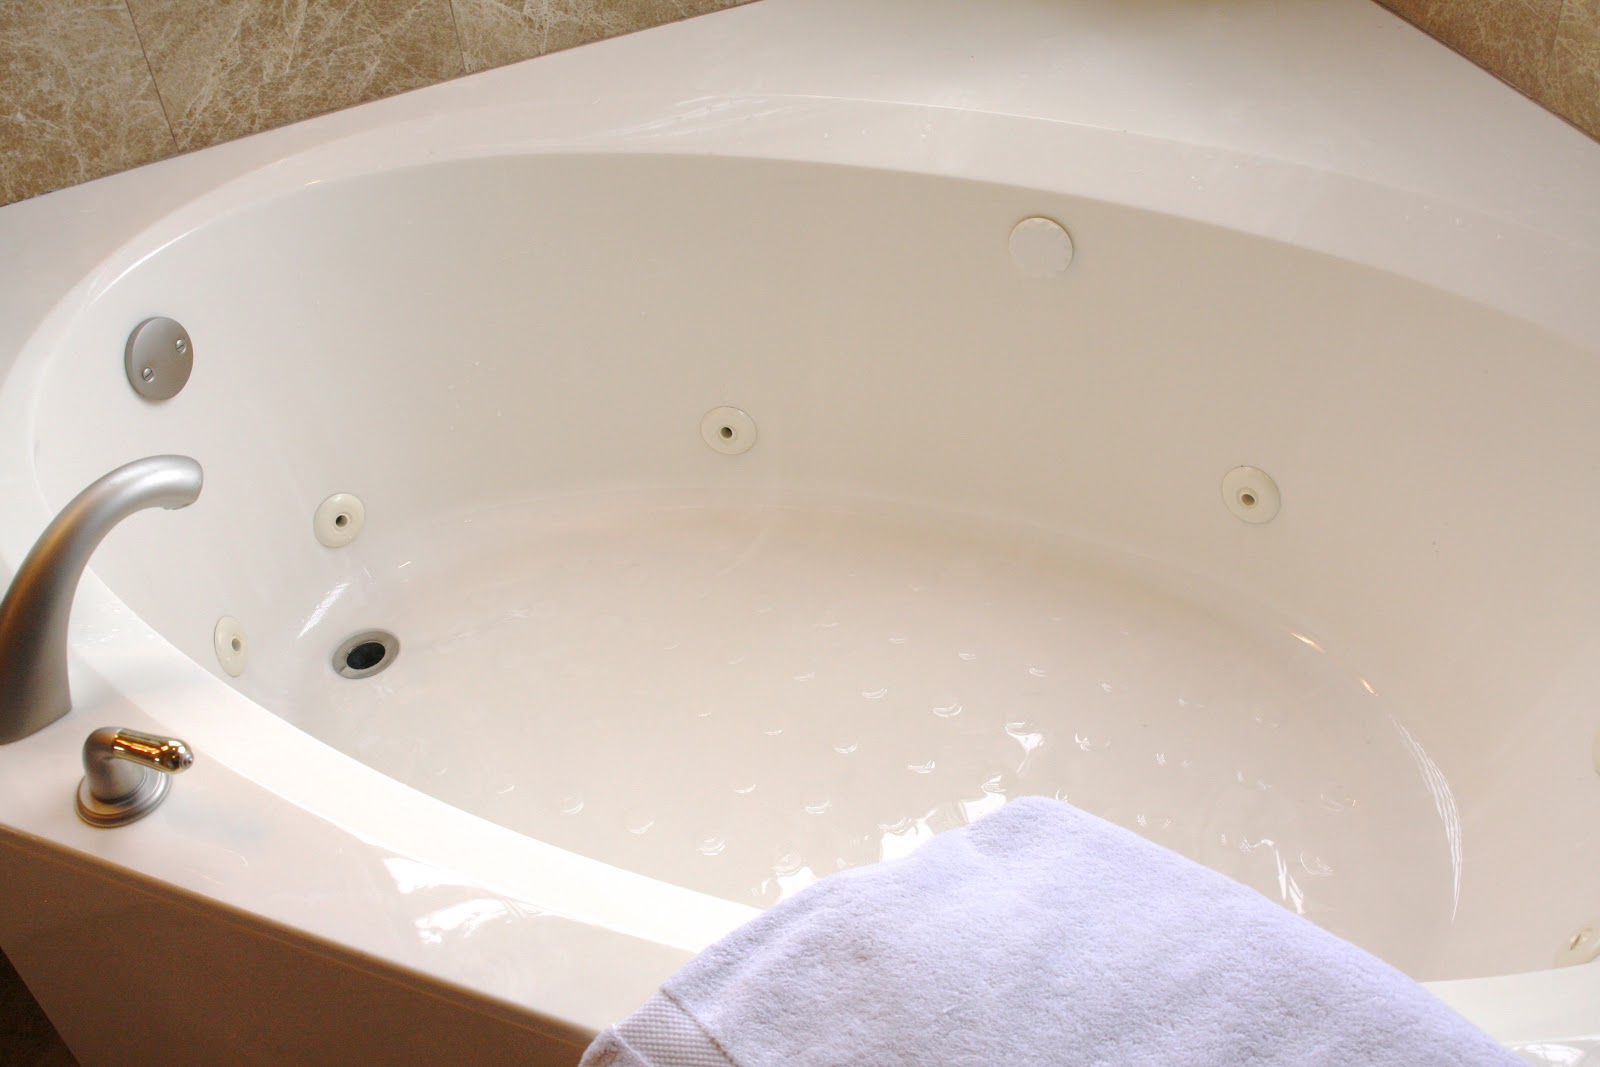 How To Clean Whirlpool Tub Jets, How To Clean Your Bathtub Jets